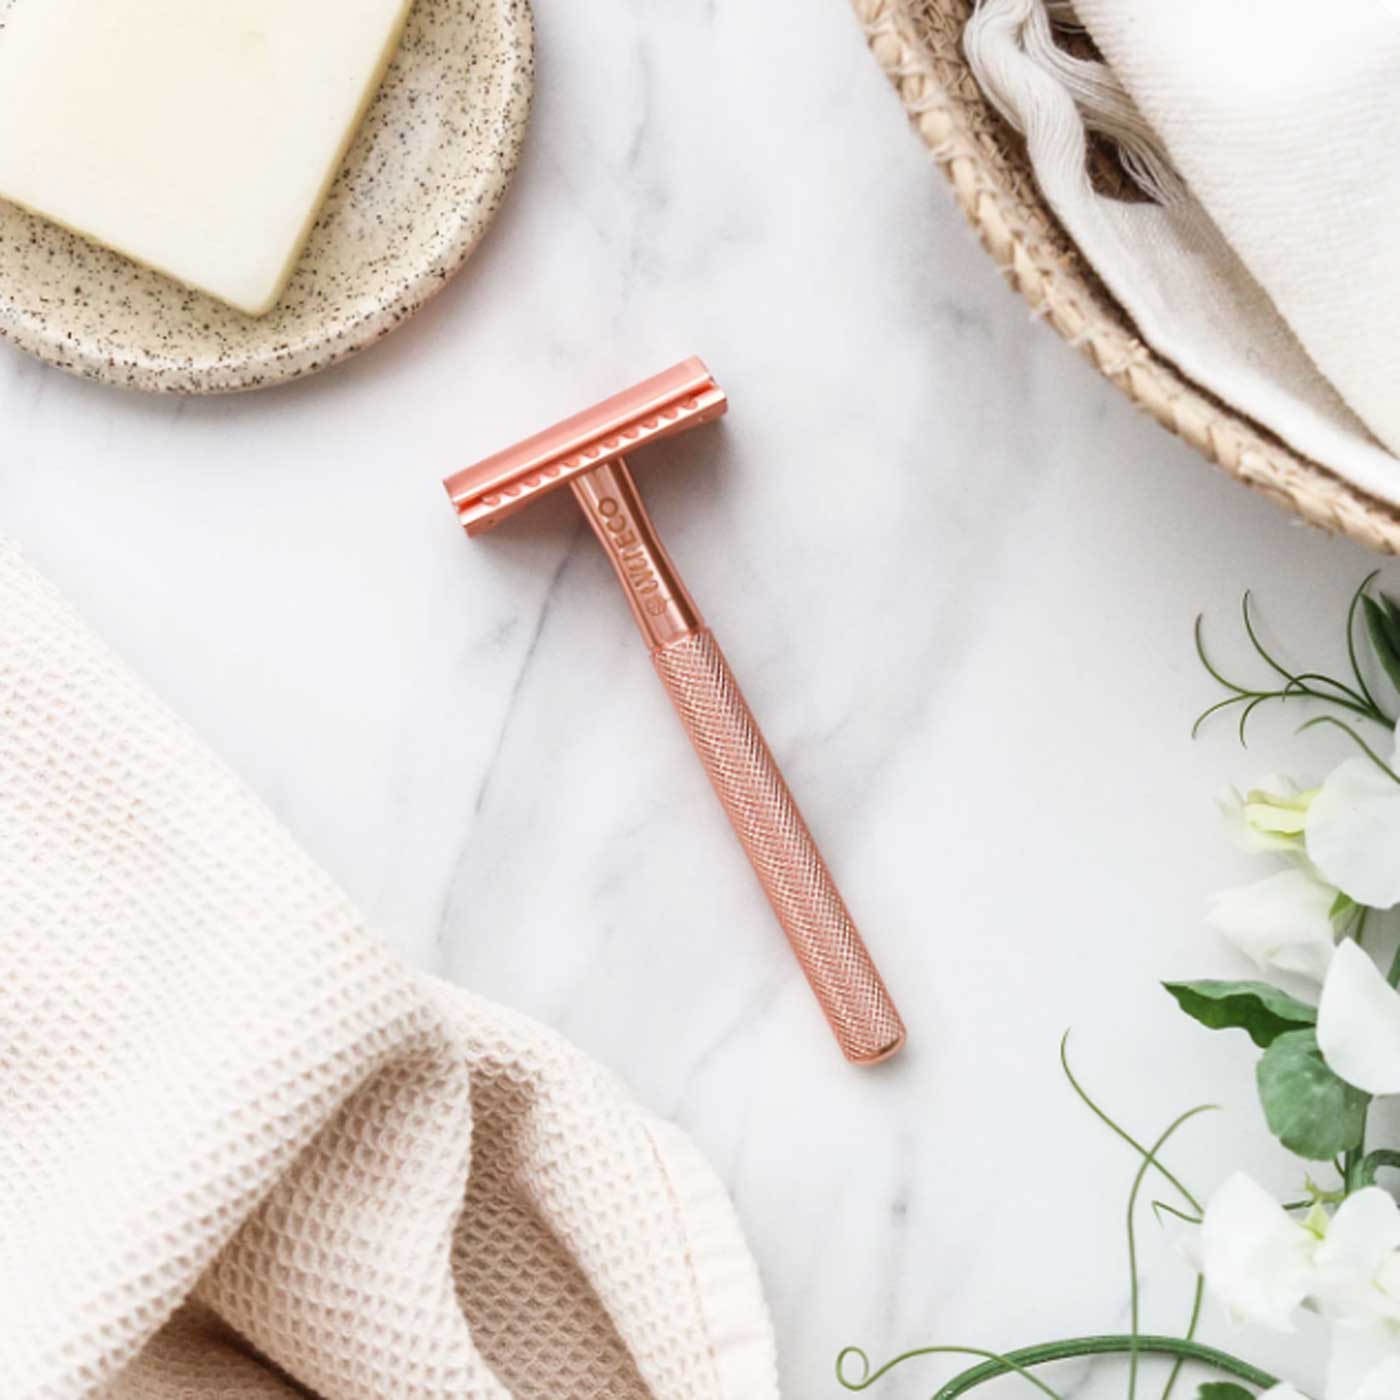 Load image into Gallery viewer, Rose gold eco-friendly reusable razor. Styled on a bathroom benchtop.
